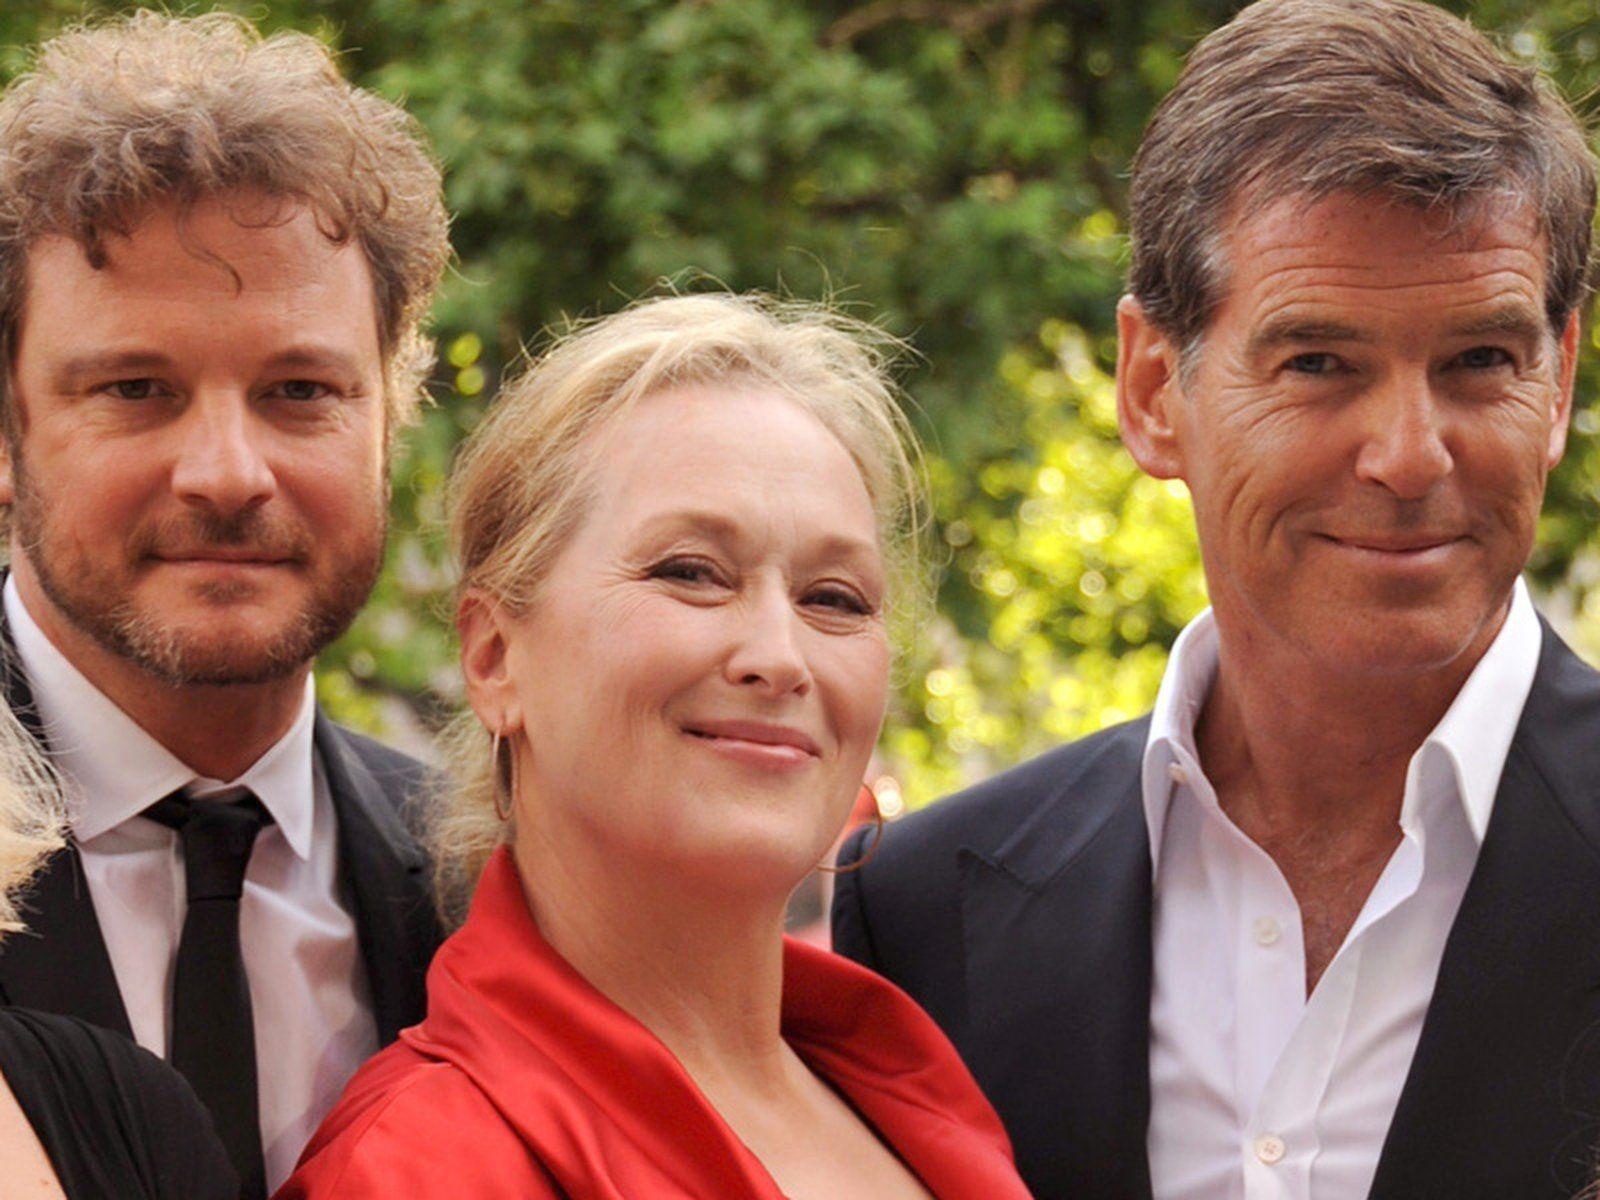 Voulez Vous? Streep, Brosnan and Firth for Mamma Mia 2